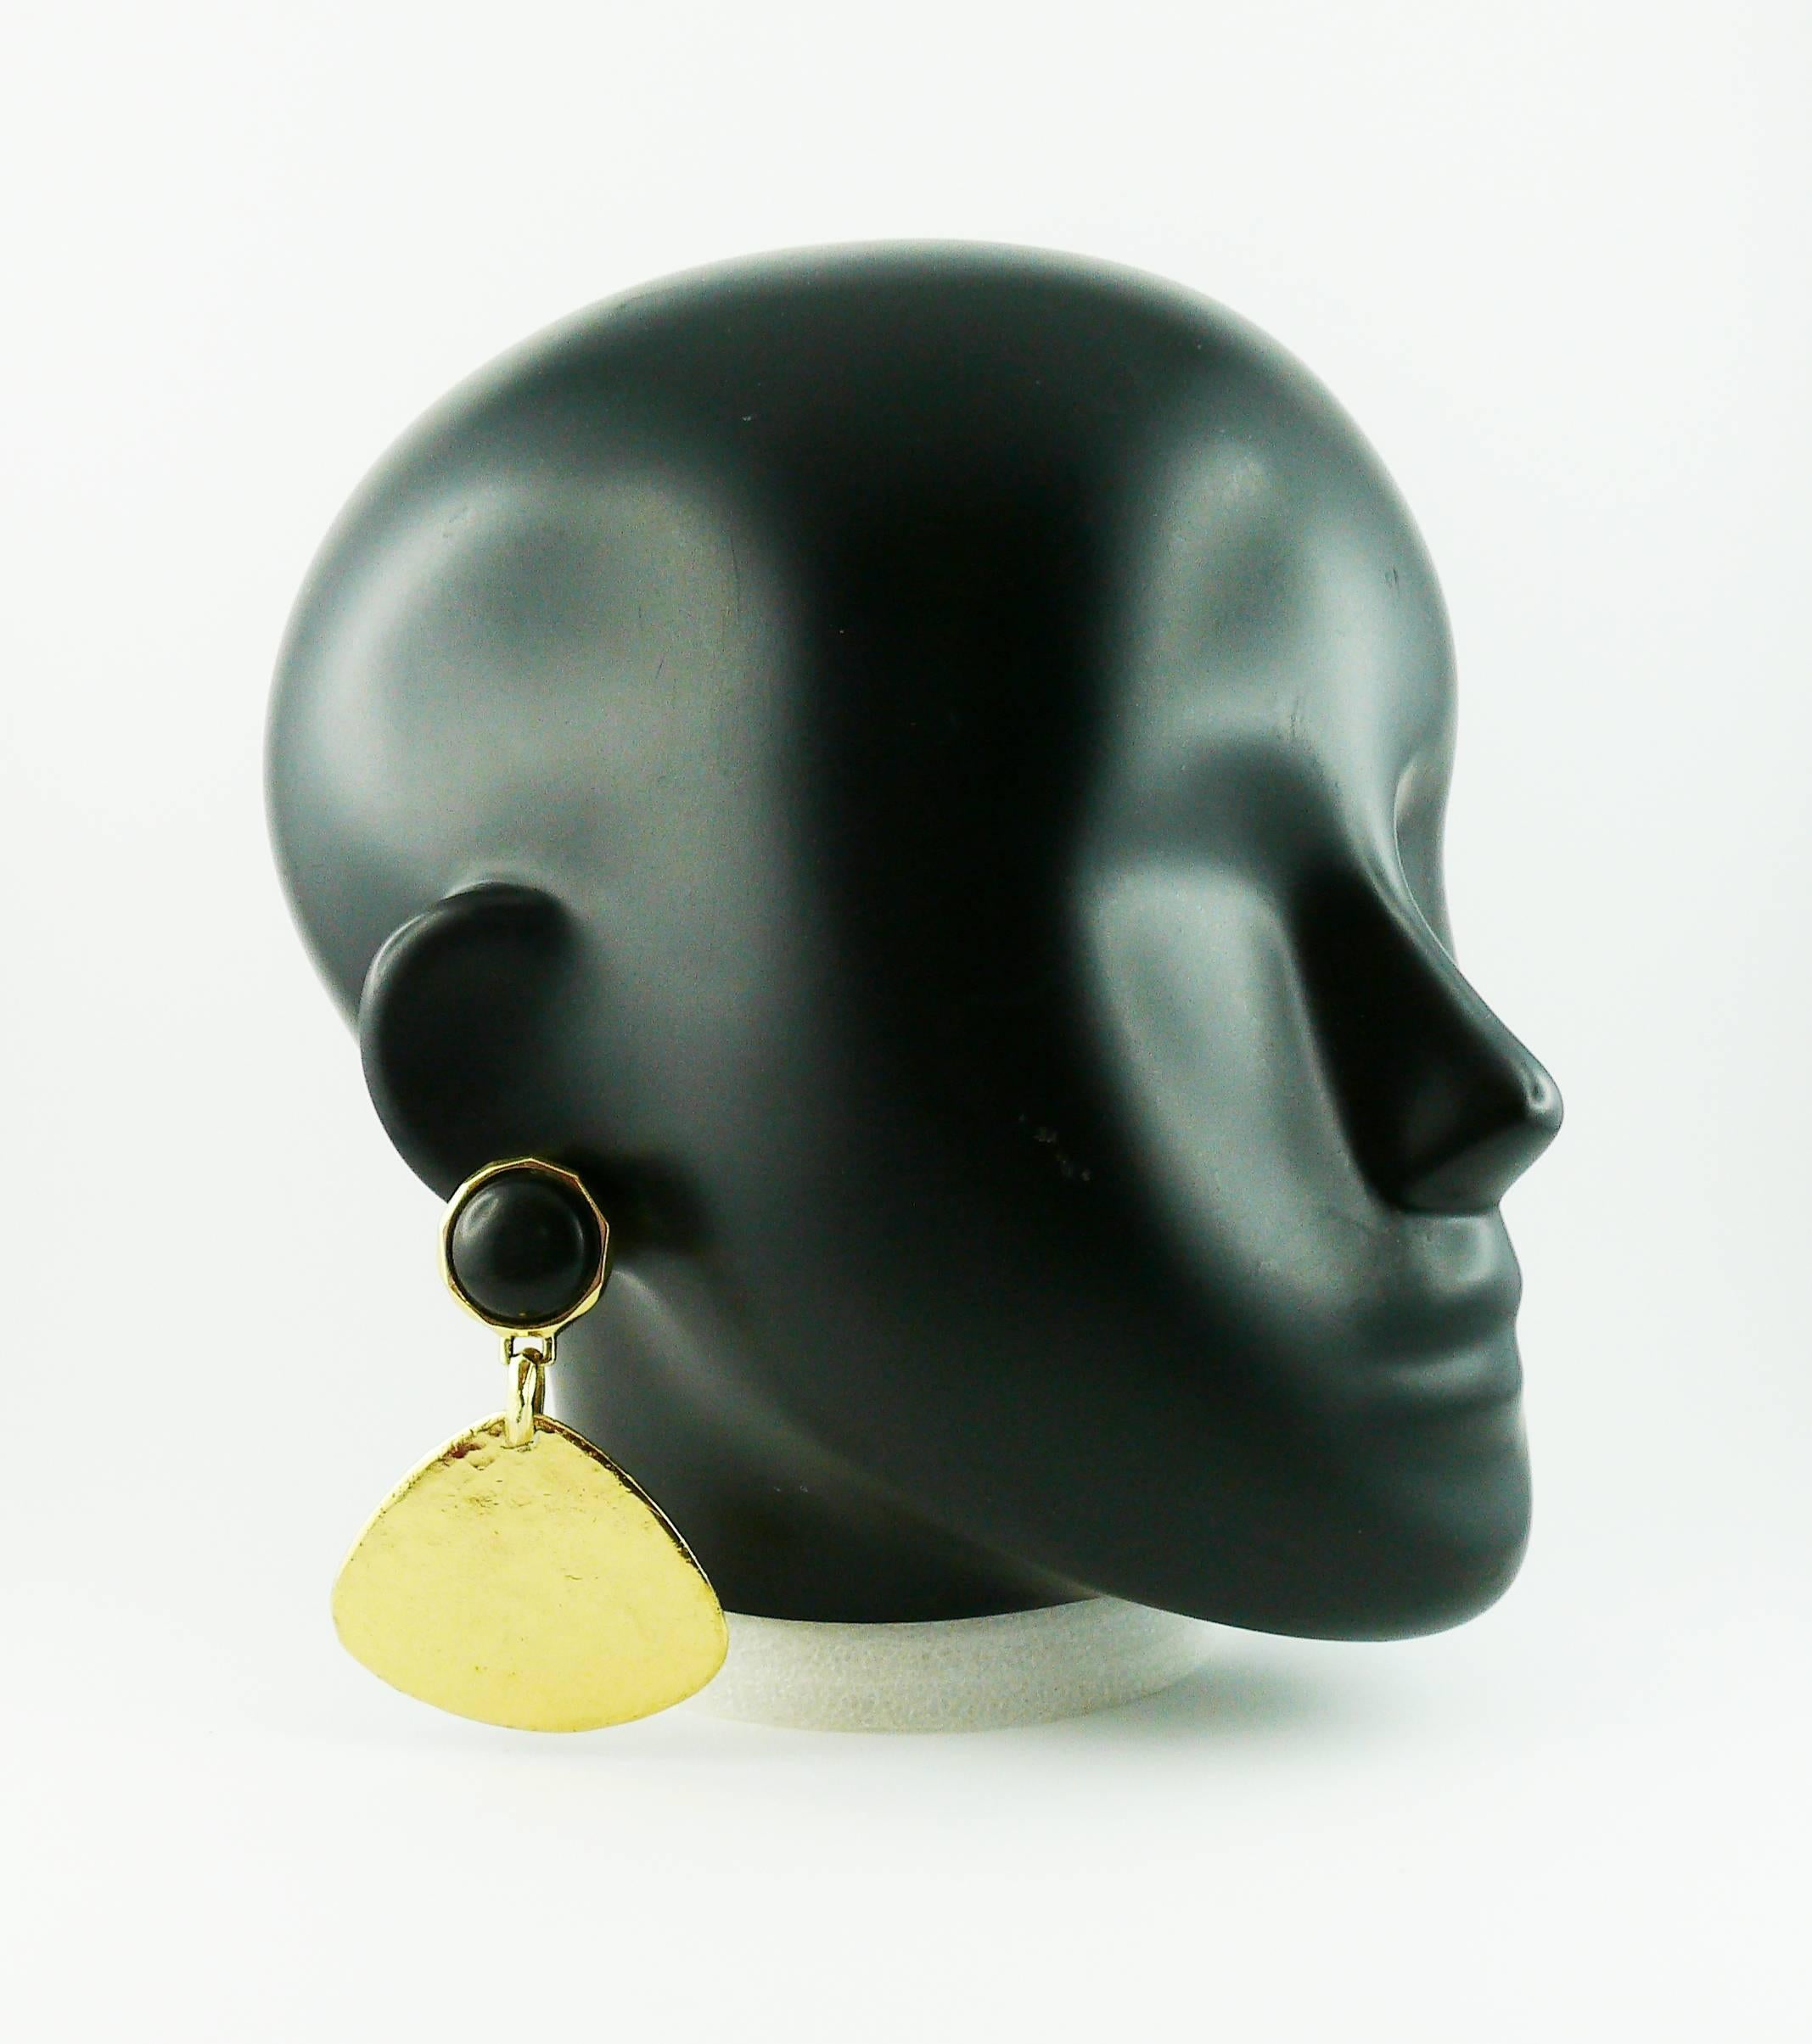 YVES SAINT LAURENT vintage African inspired dangling earrings (clip-on) featuring an ebony wood button top with massive hammered gold tone charms.

Marked YSL Made in France.

Indicative measurements : length approx. 7.4 cm (2.91 inches) / maximum